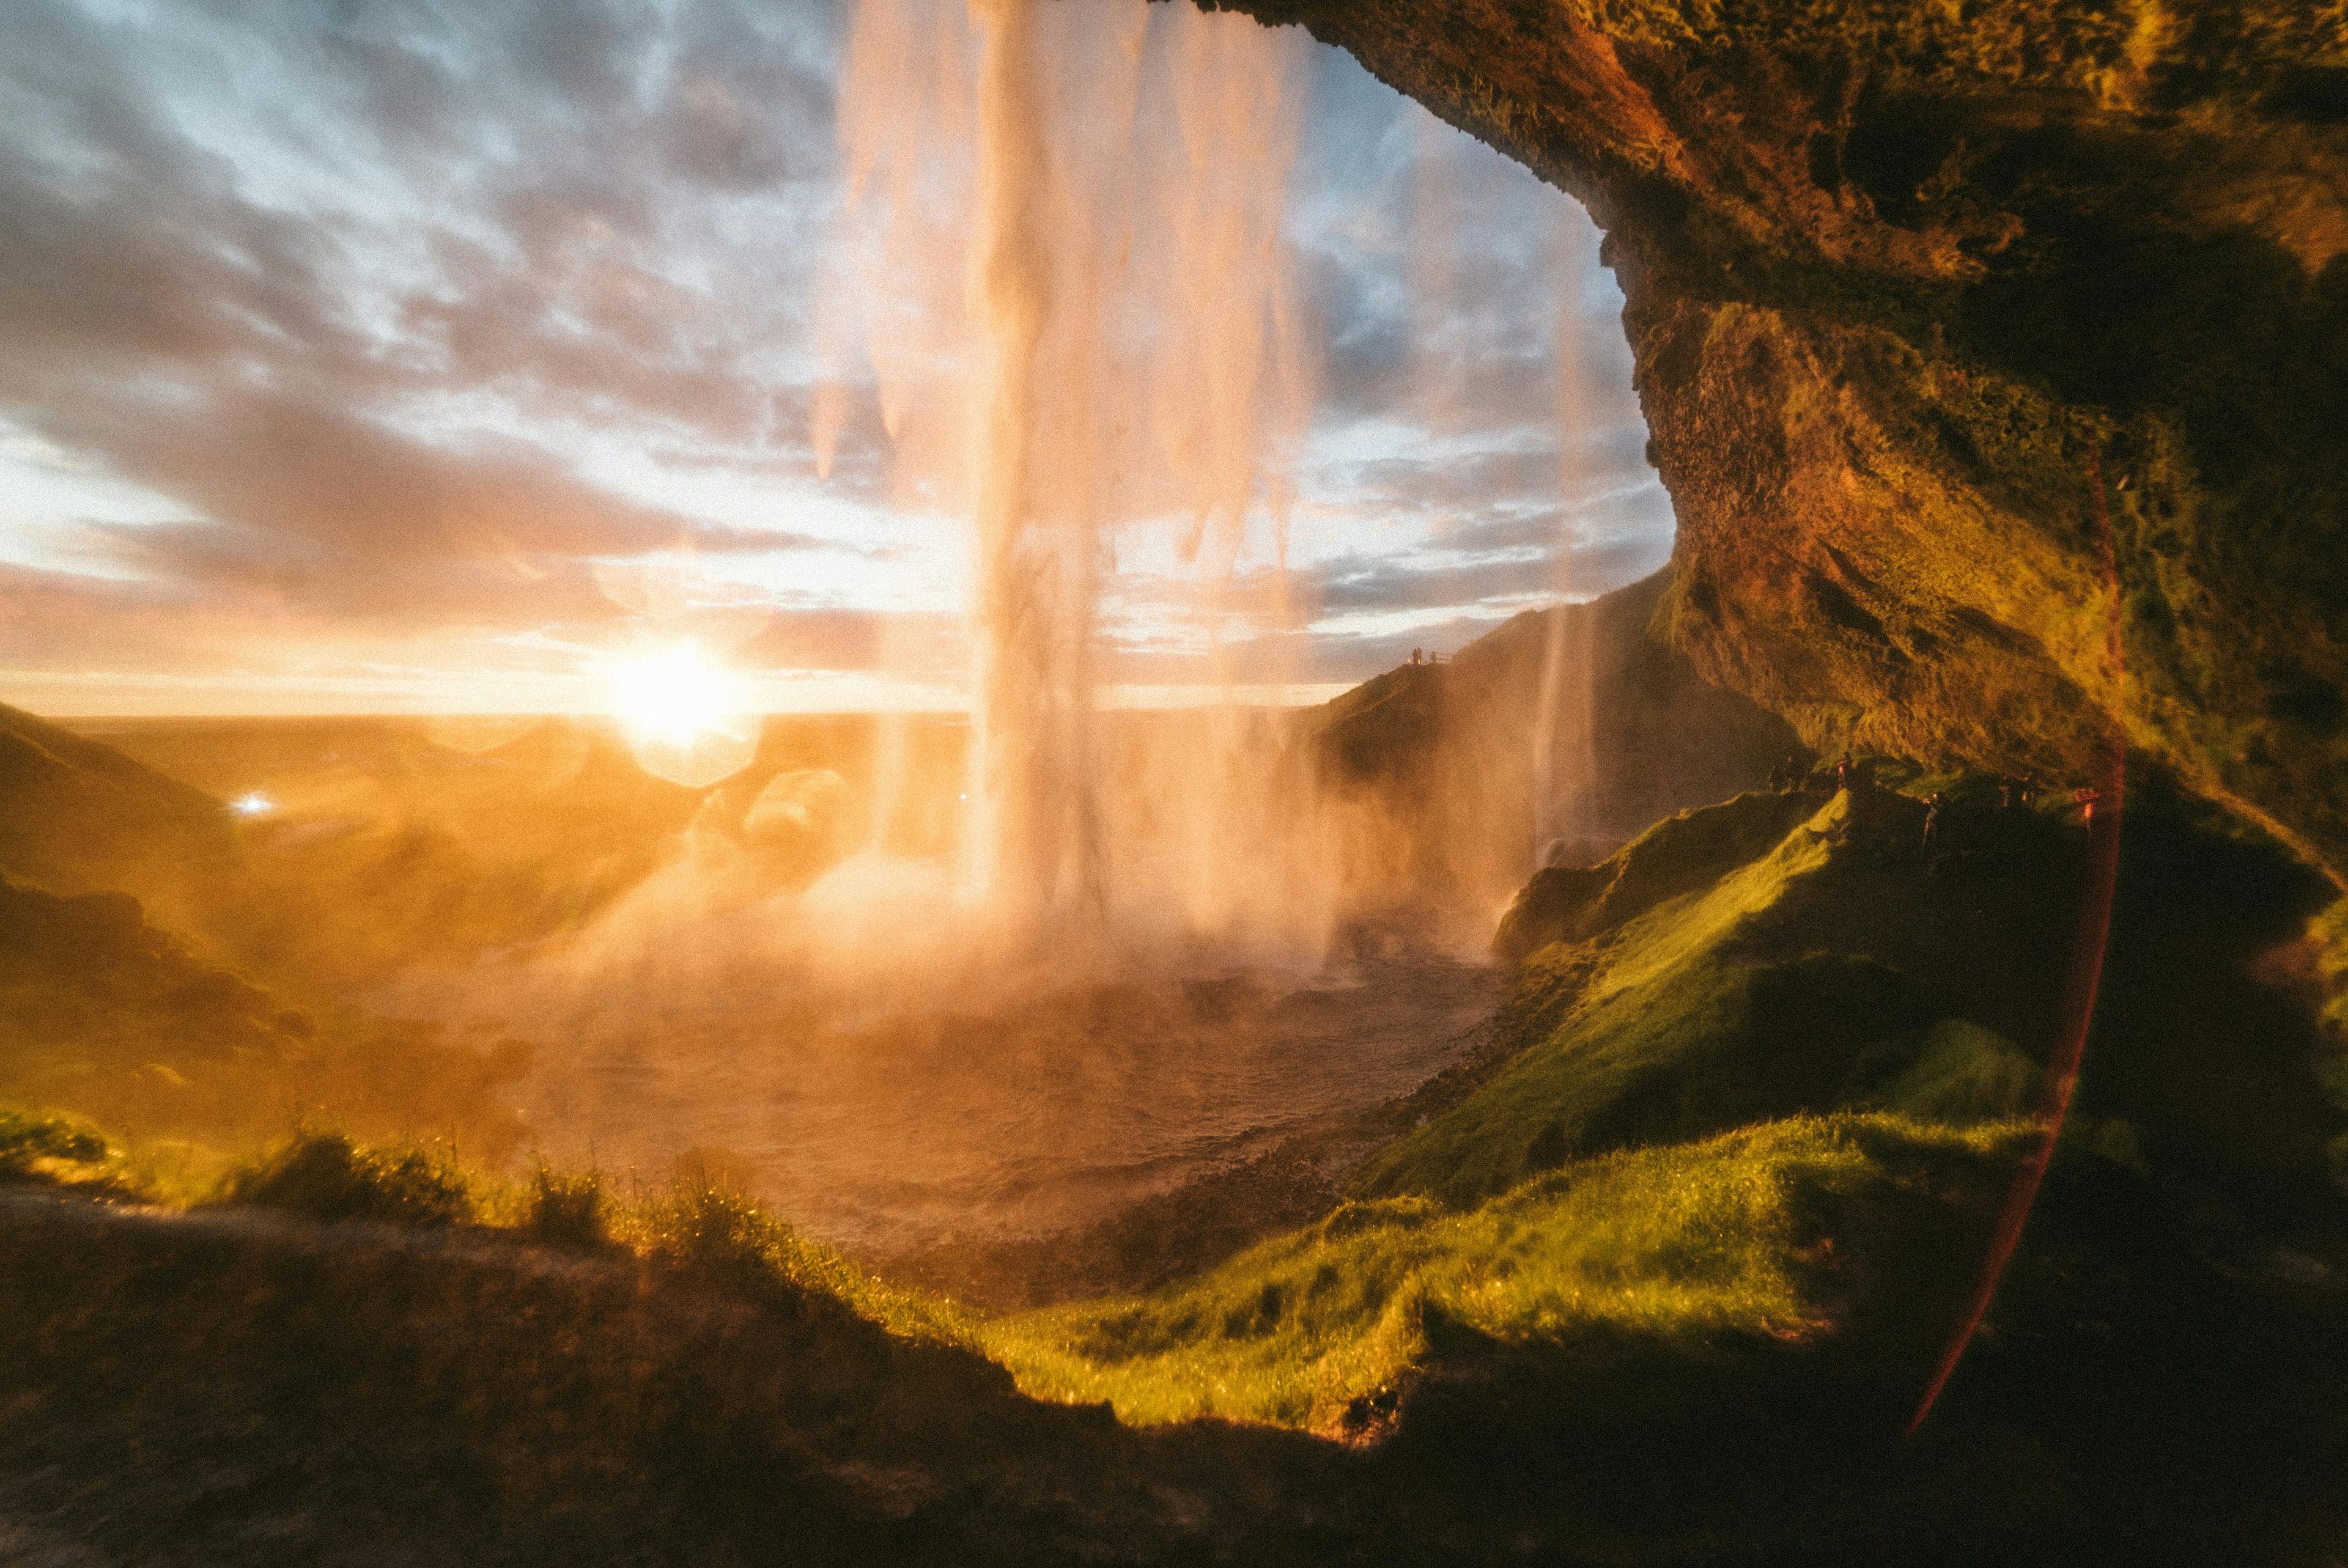 View of Seljalandsfoss waterfall from behind the cascade at sunset, with golden light illuminating the mist and green landscape.